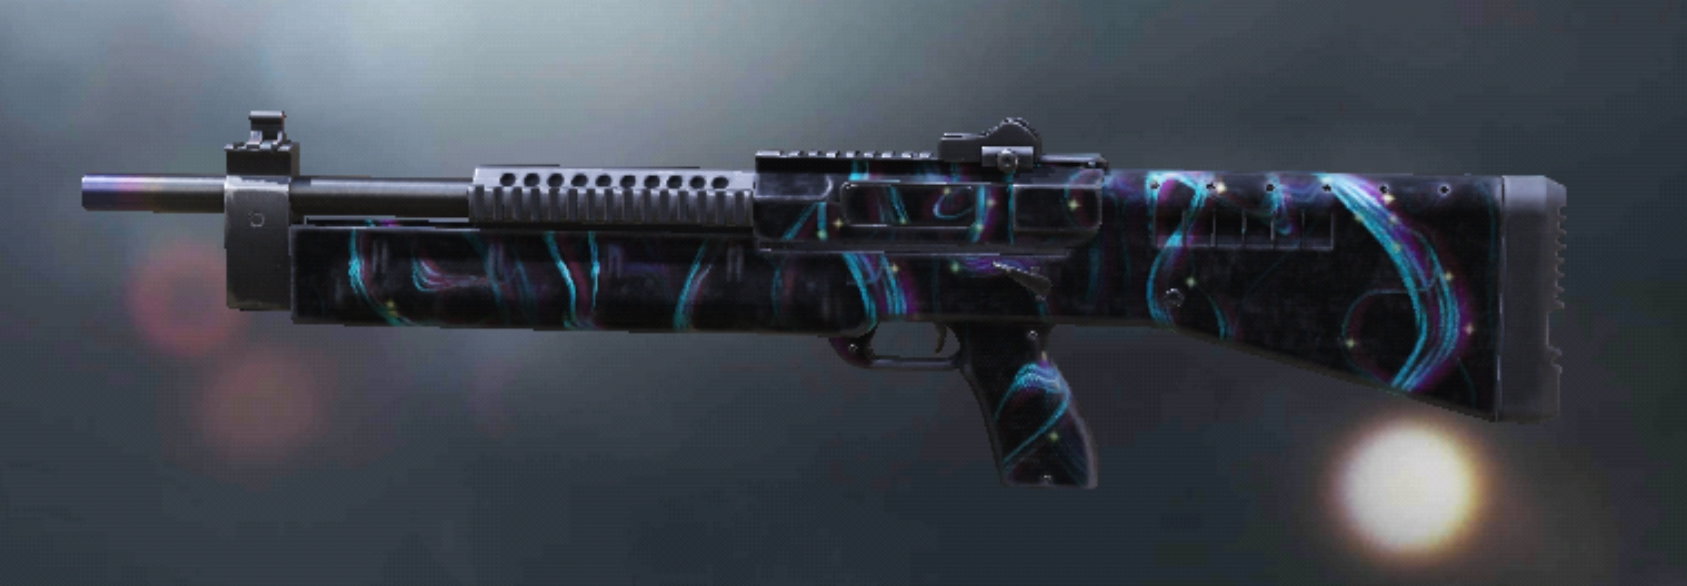 HS2126 Graceful Blue, Uncommon camo in Call of Duty Mobile